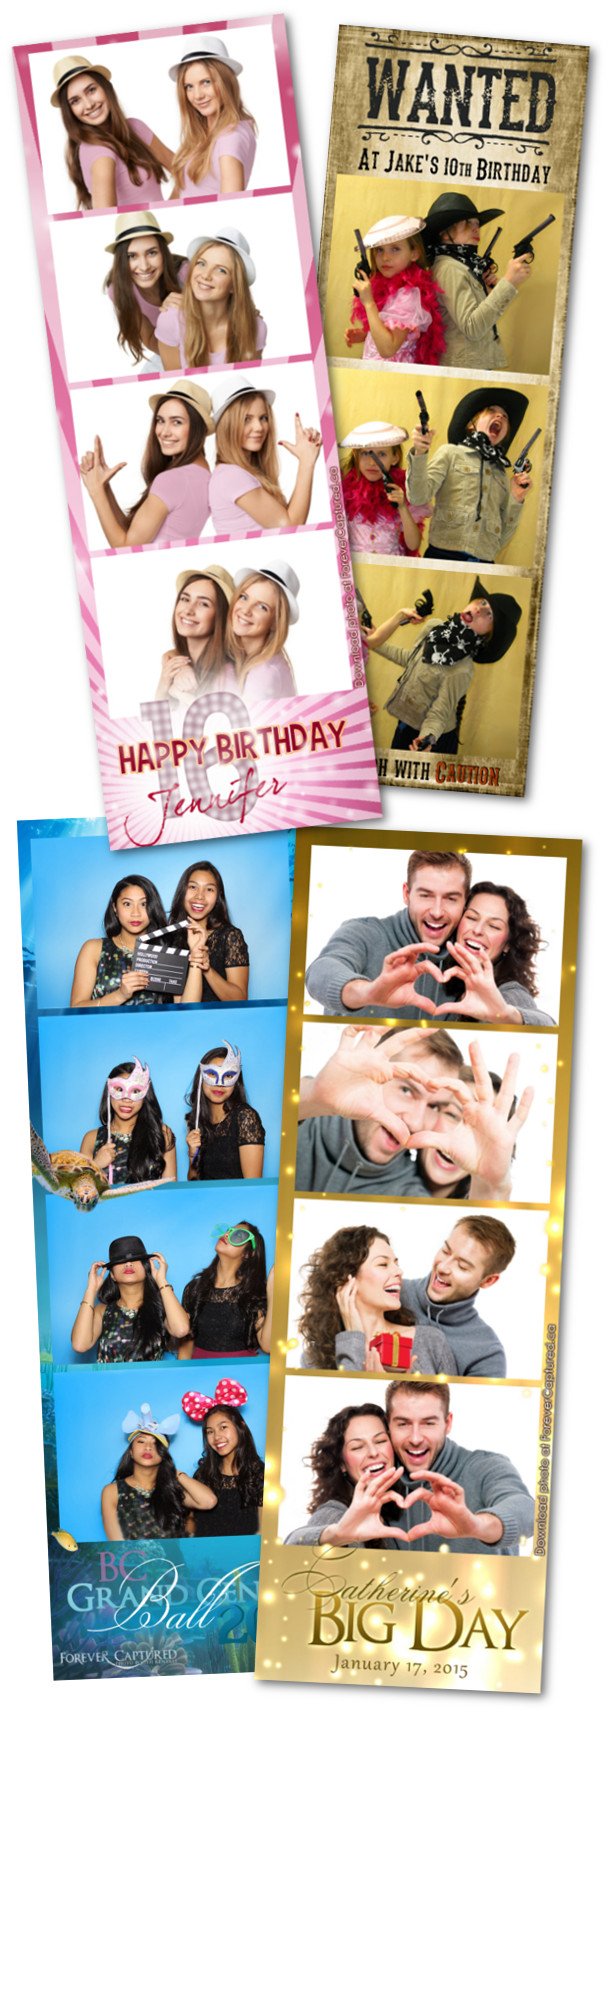 Photobooth hire for parties, weddings, and events in BC.